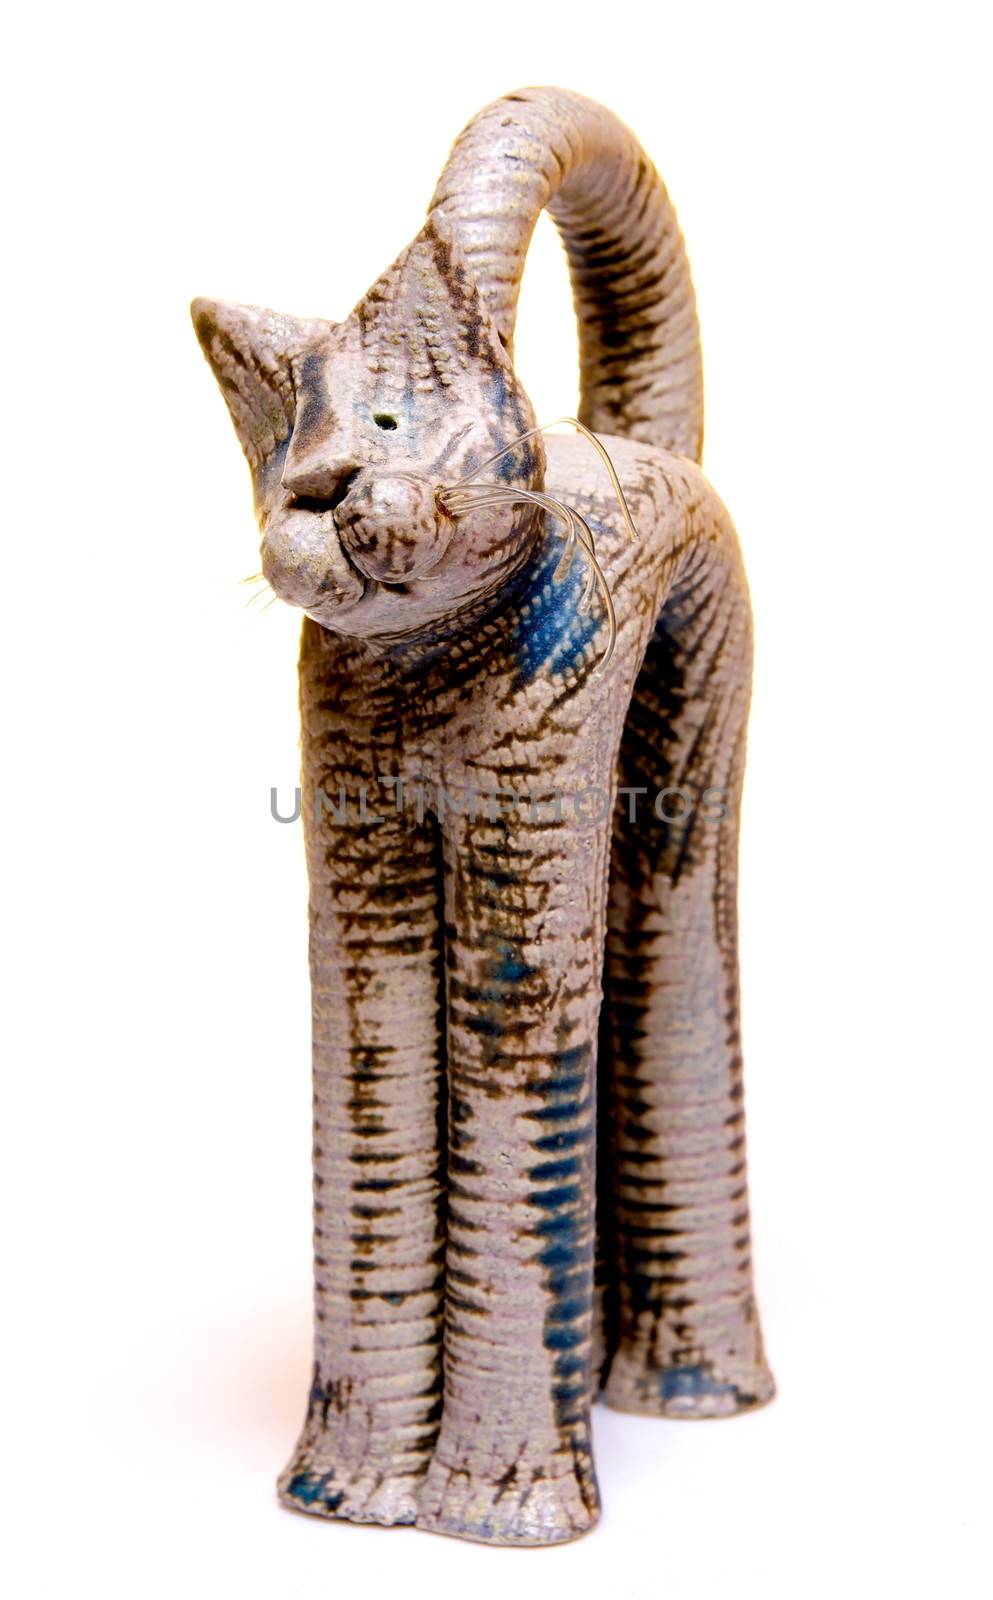 Cat figurine on white background by anderm